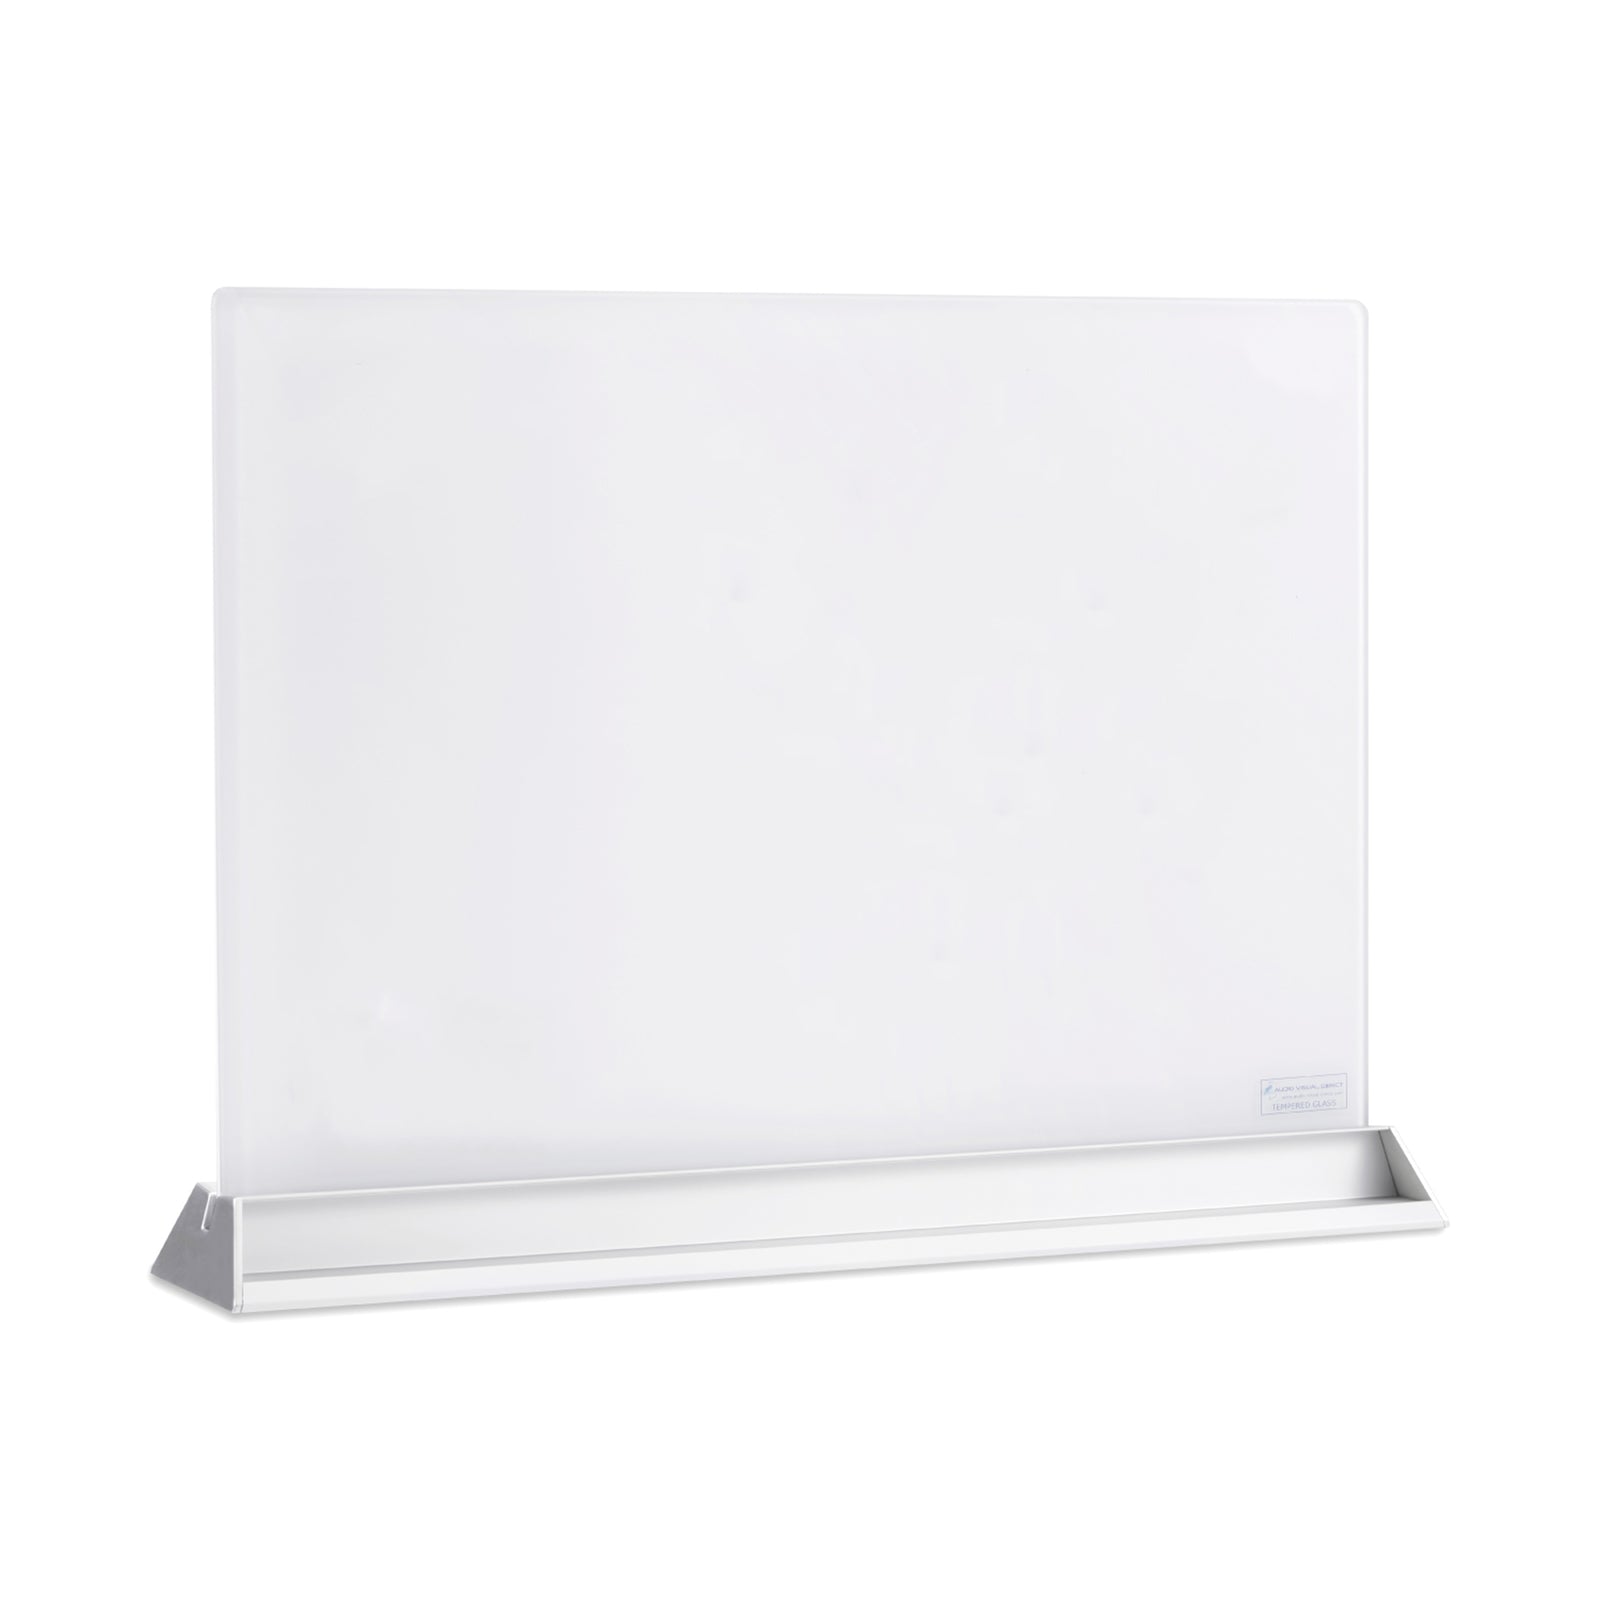 DexBoard 48 x 36-in Magnetic Dry Erase Board with Pen Tray| Aluminum Frame  Portable Wall Large Whiteboard Message Presentation Board for Office 